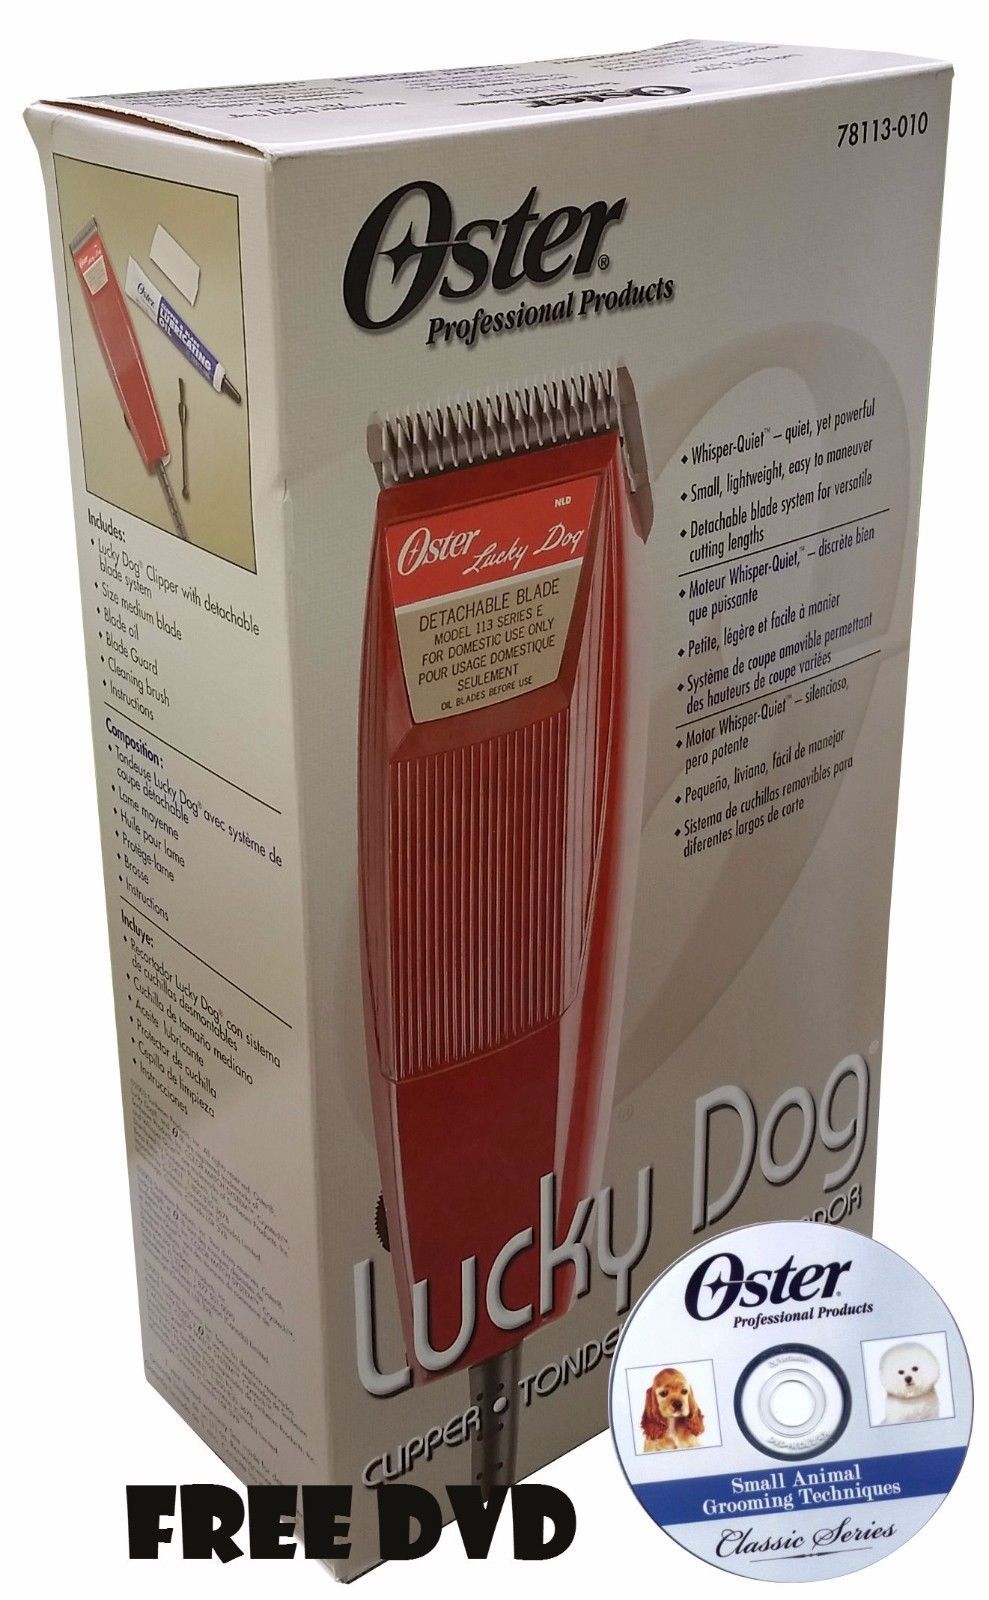 oster lucky dog clippers model 113